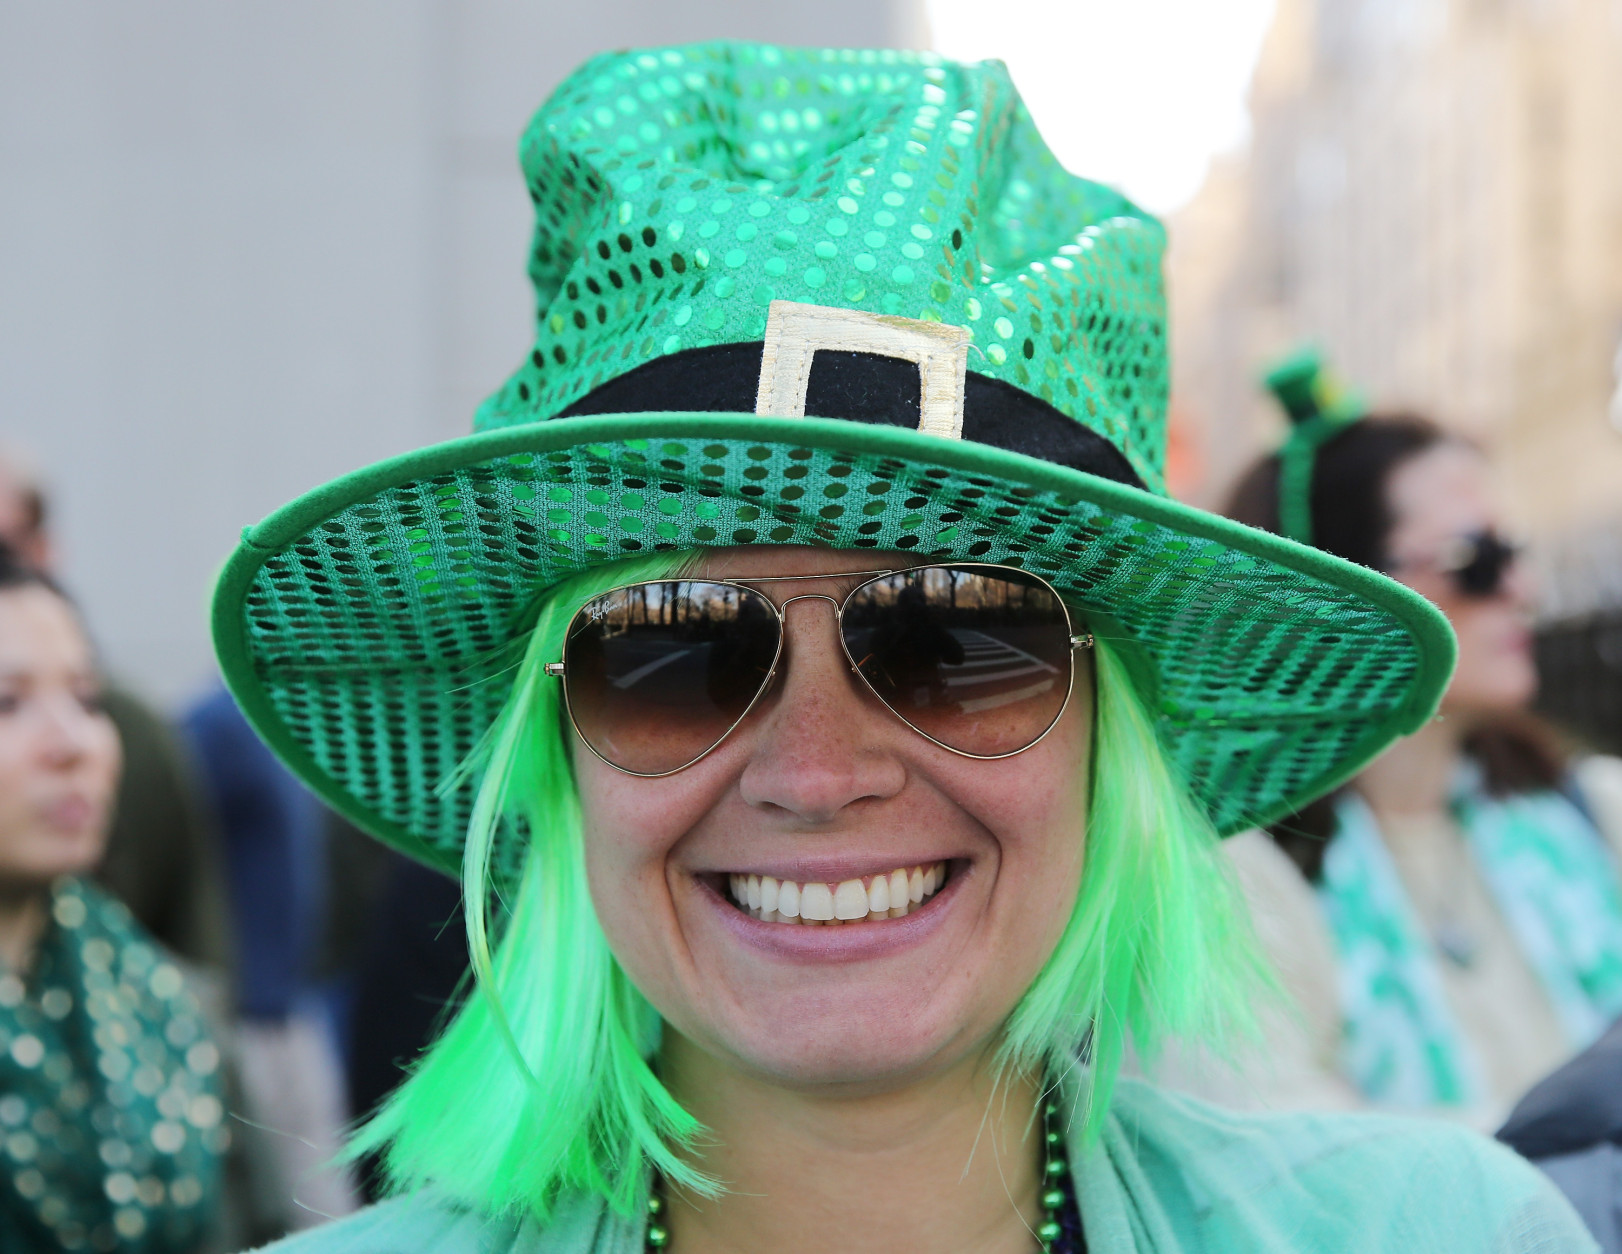 <p><strong>So, wait a minute — the whole heavy-drinking, green-wearing, bad-singing celebration that we think of as St. Patrick’s Day: That’s really more of an American thing?</strong></p>
<p>Pretty much. Check out the account of New York’s festivities for St. Patrick’s Day 1860 in <a href="http://www.nytimes.com/1860/03/19/news/st-patrick-s-day.html" target="_blank" rel="noopener noreferrer">The New York Times</a>:</p>
<p>“…men and women in all stages of intoxication, from that balmy condition in which a man swears eternal friendship to all the world, and is anxious to embrace everyone he meets, to that in which he is unable to walk without tying knots in his legs, though supported by an official friend on either side. Drunken women with infants in their arms, men argumentatively disposed to establish logically the fact of their own sobriety, and victims of pugilistic skill, with too much color about the eyes, were yarded like cattle, in the fenced inclosure for prisoners in the Court.”</p>
